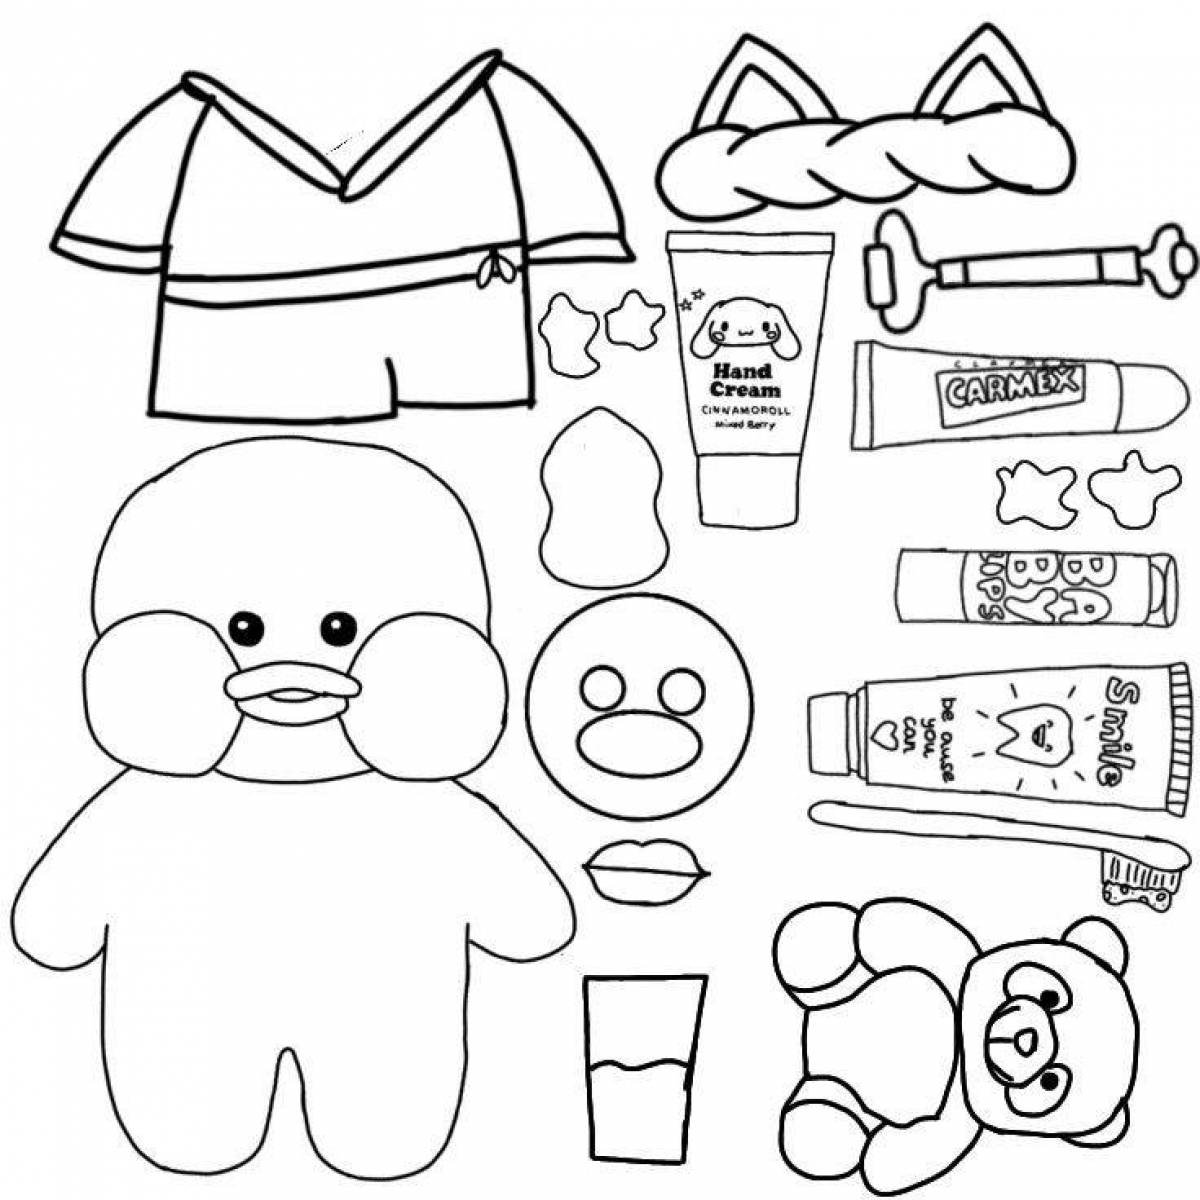 Colouring funny cosmetics for lalafanfan duck